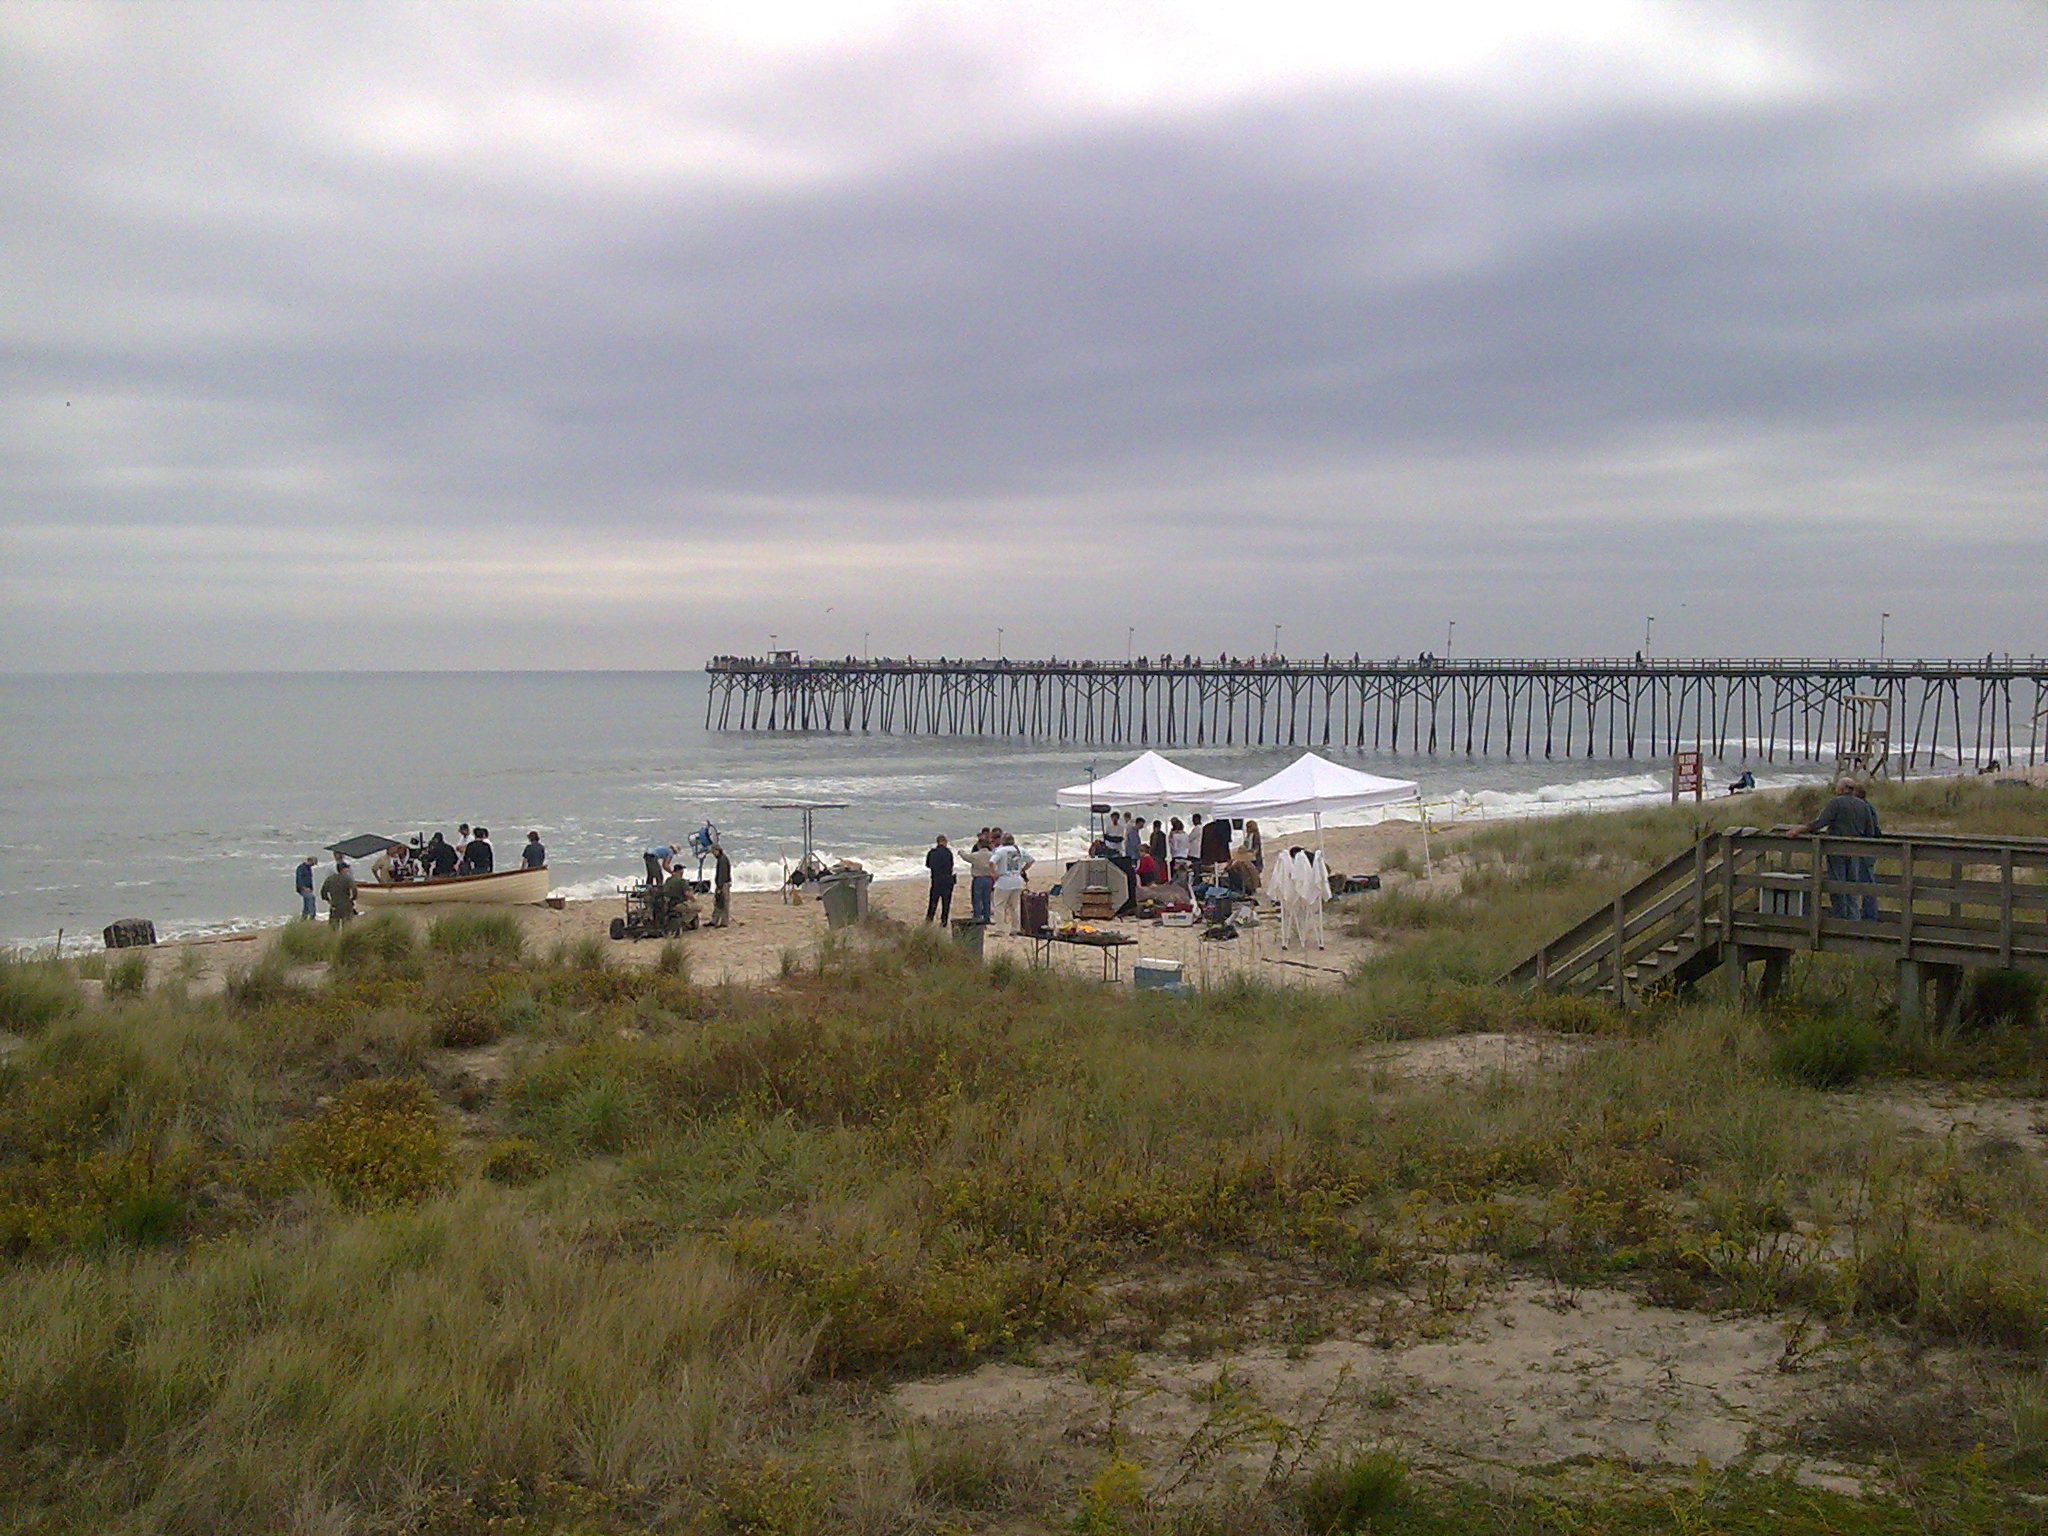 PATT NODAY: while filming on-location in Kure Beach, North Carolina to make another TV commercial for the North Carolina Education Lottery campaign.